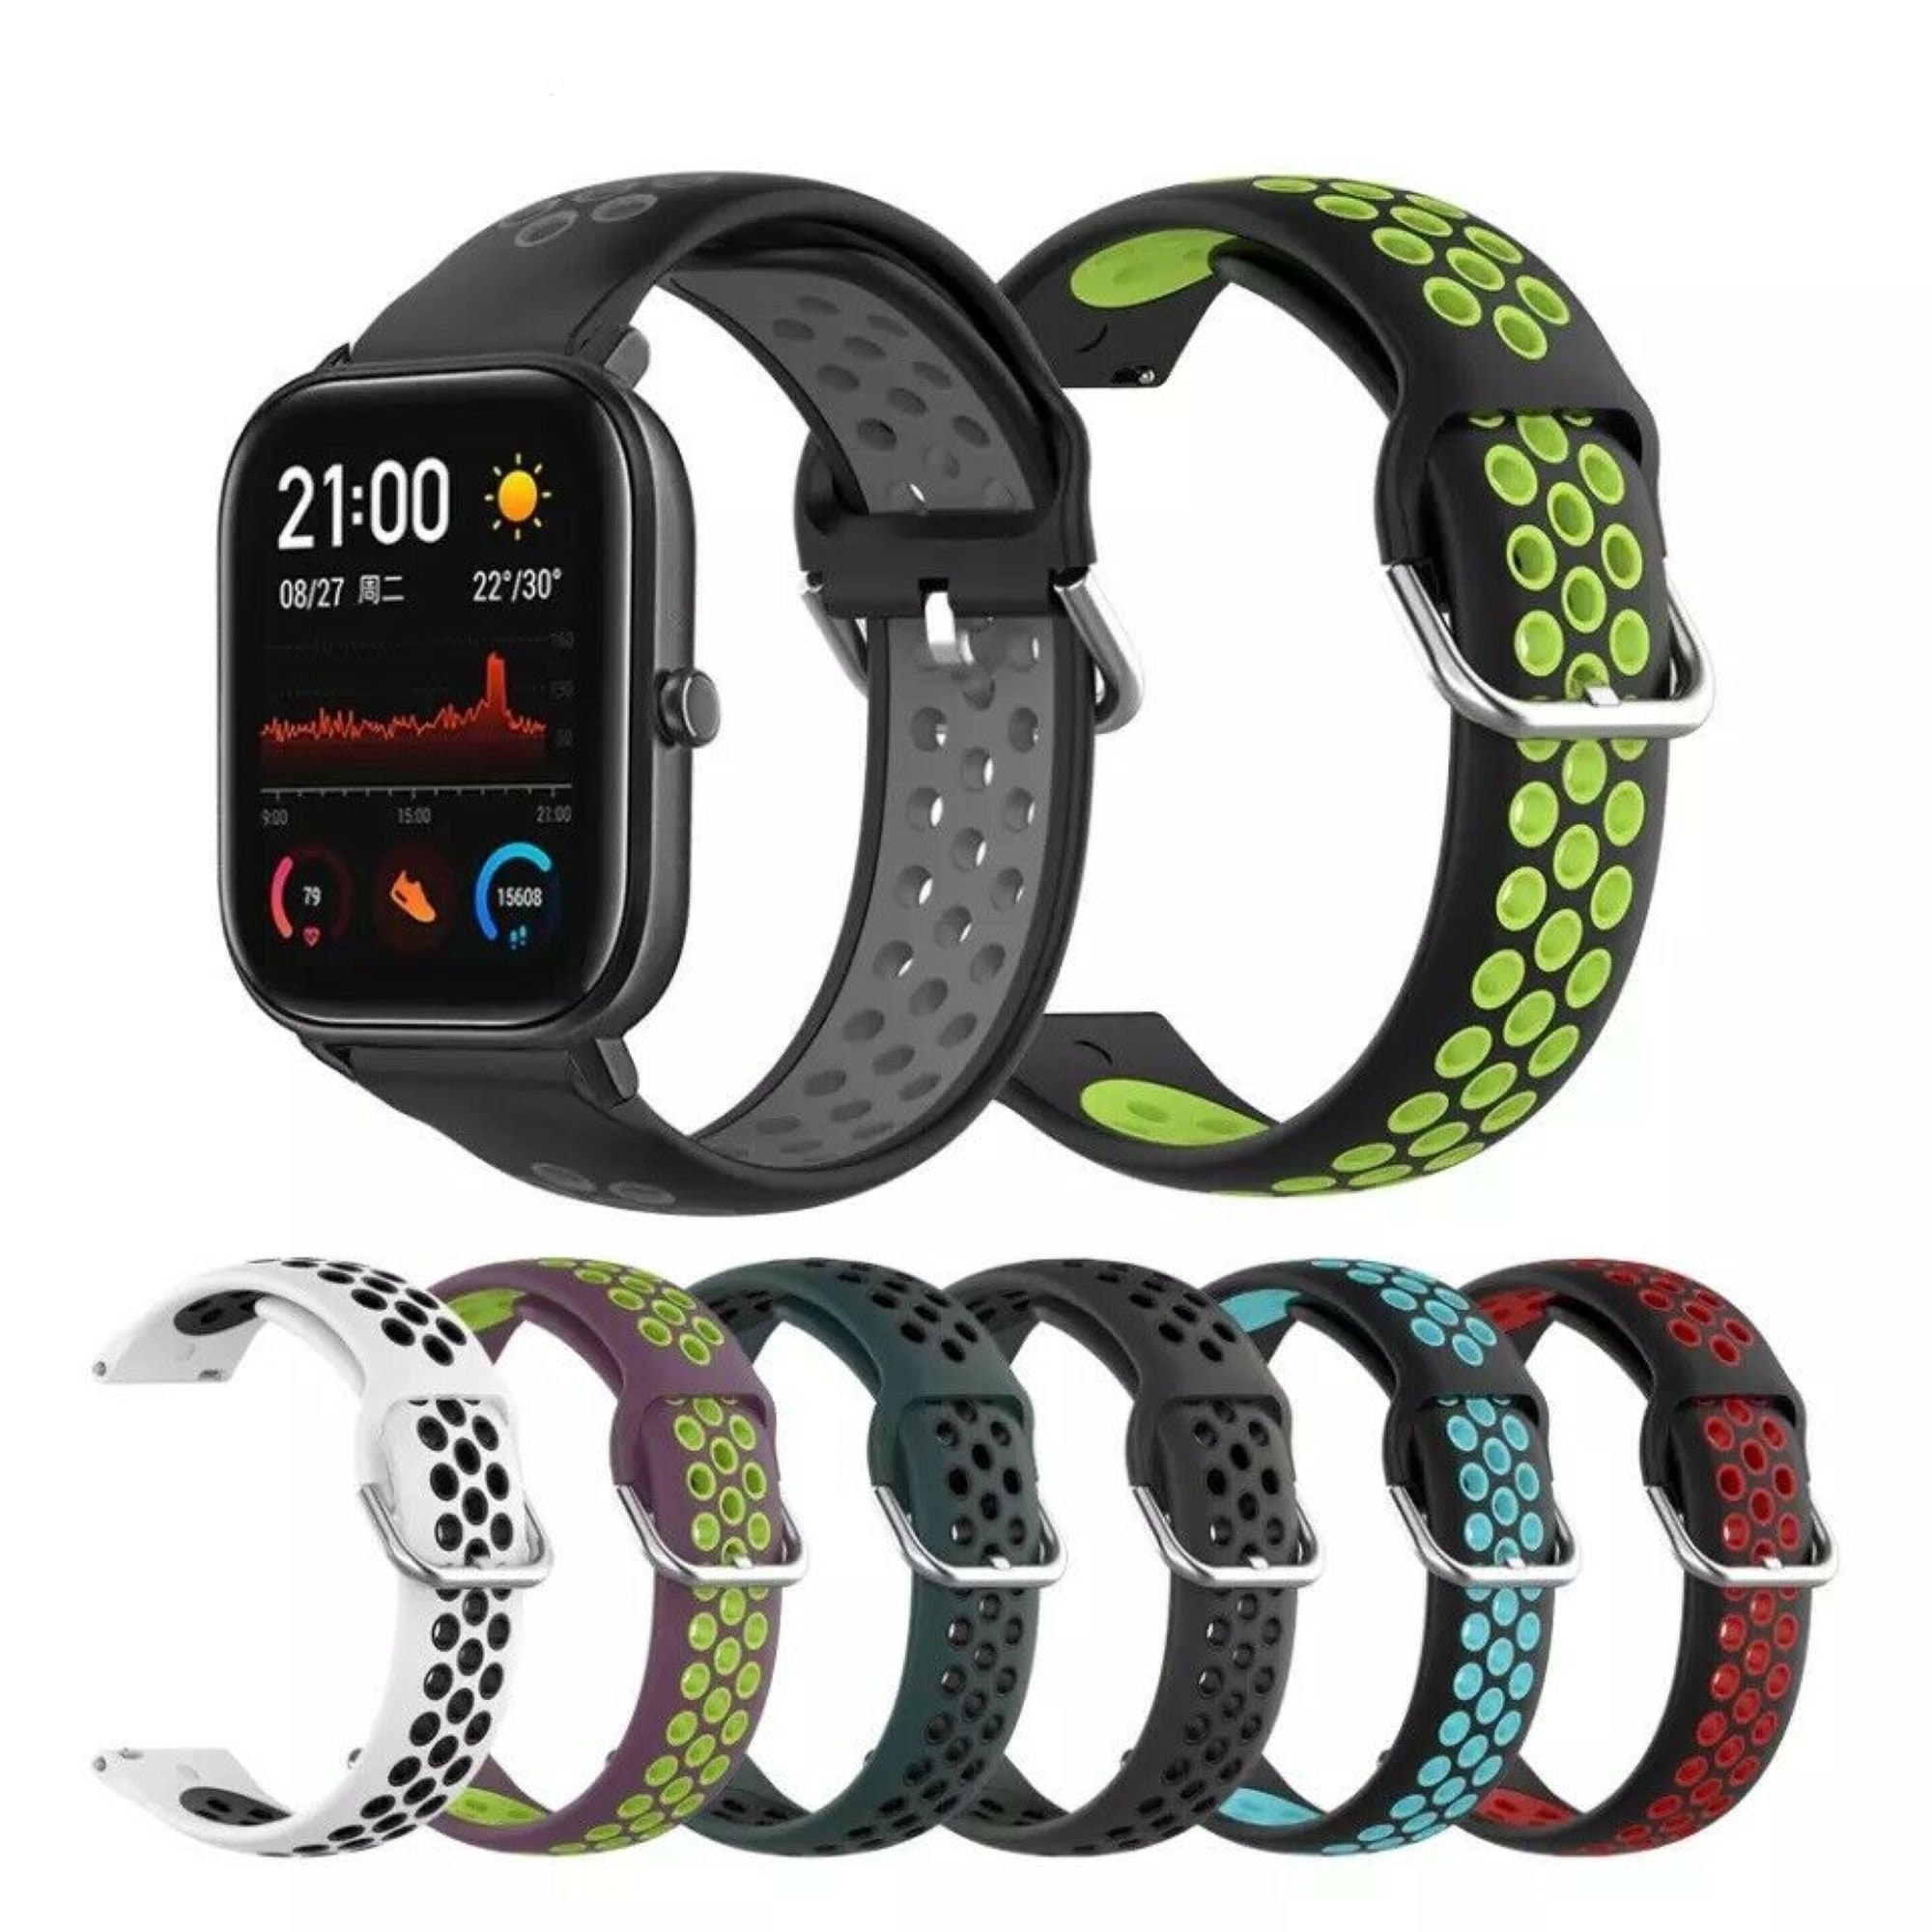  Sport Bands Compatible with Amazfit Bip U Pro/Gts 4mini Band  20mm Breathable Replacement Silicone Bands Straps Wristband- Black Gray :  Cell Phones & Accessories